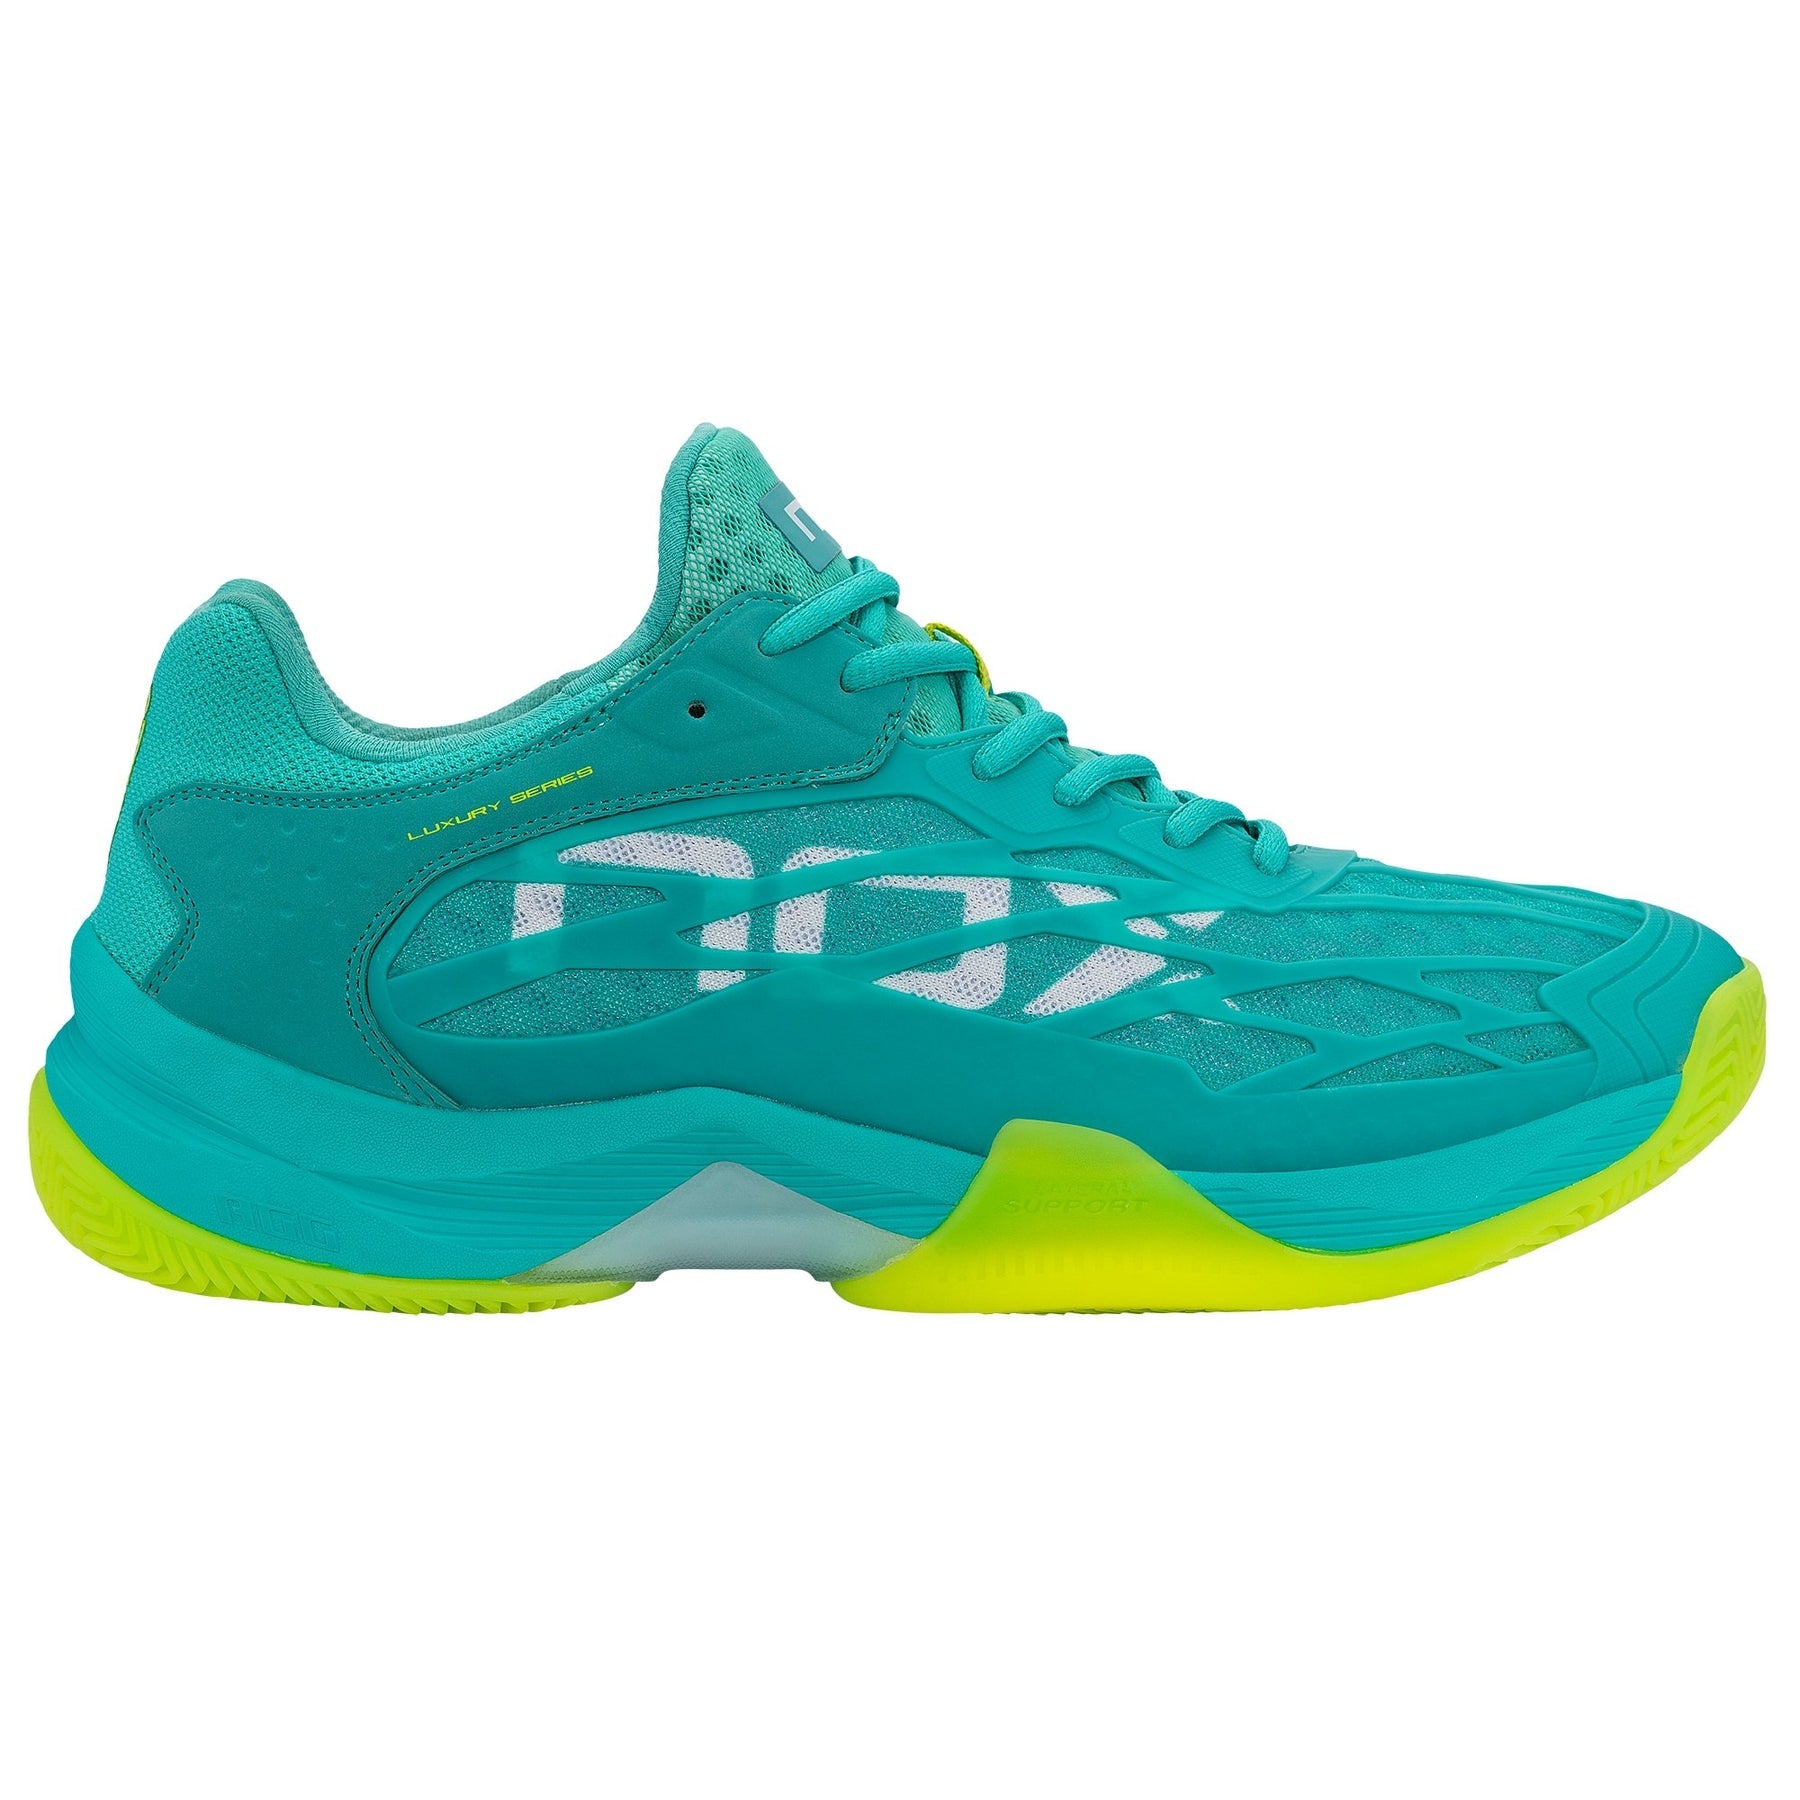 Nox AT10 Luxury Padel Shoes (Turquoise/Lime)